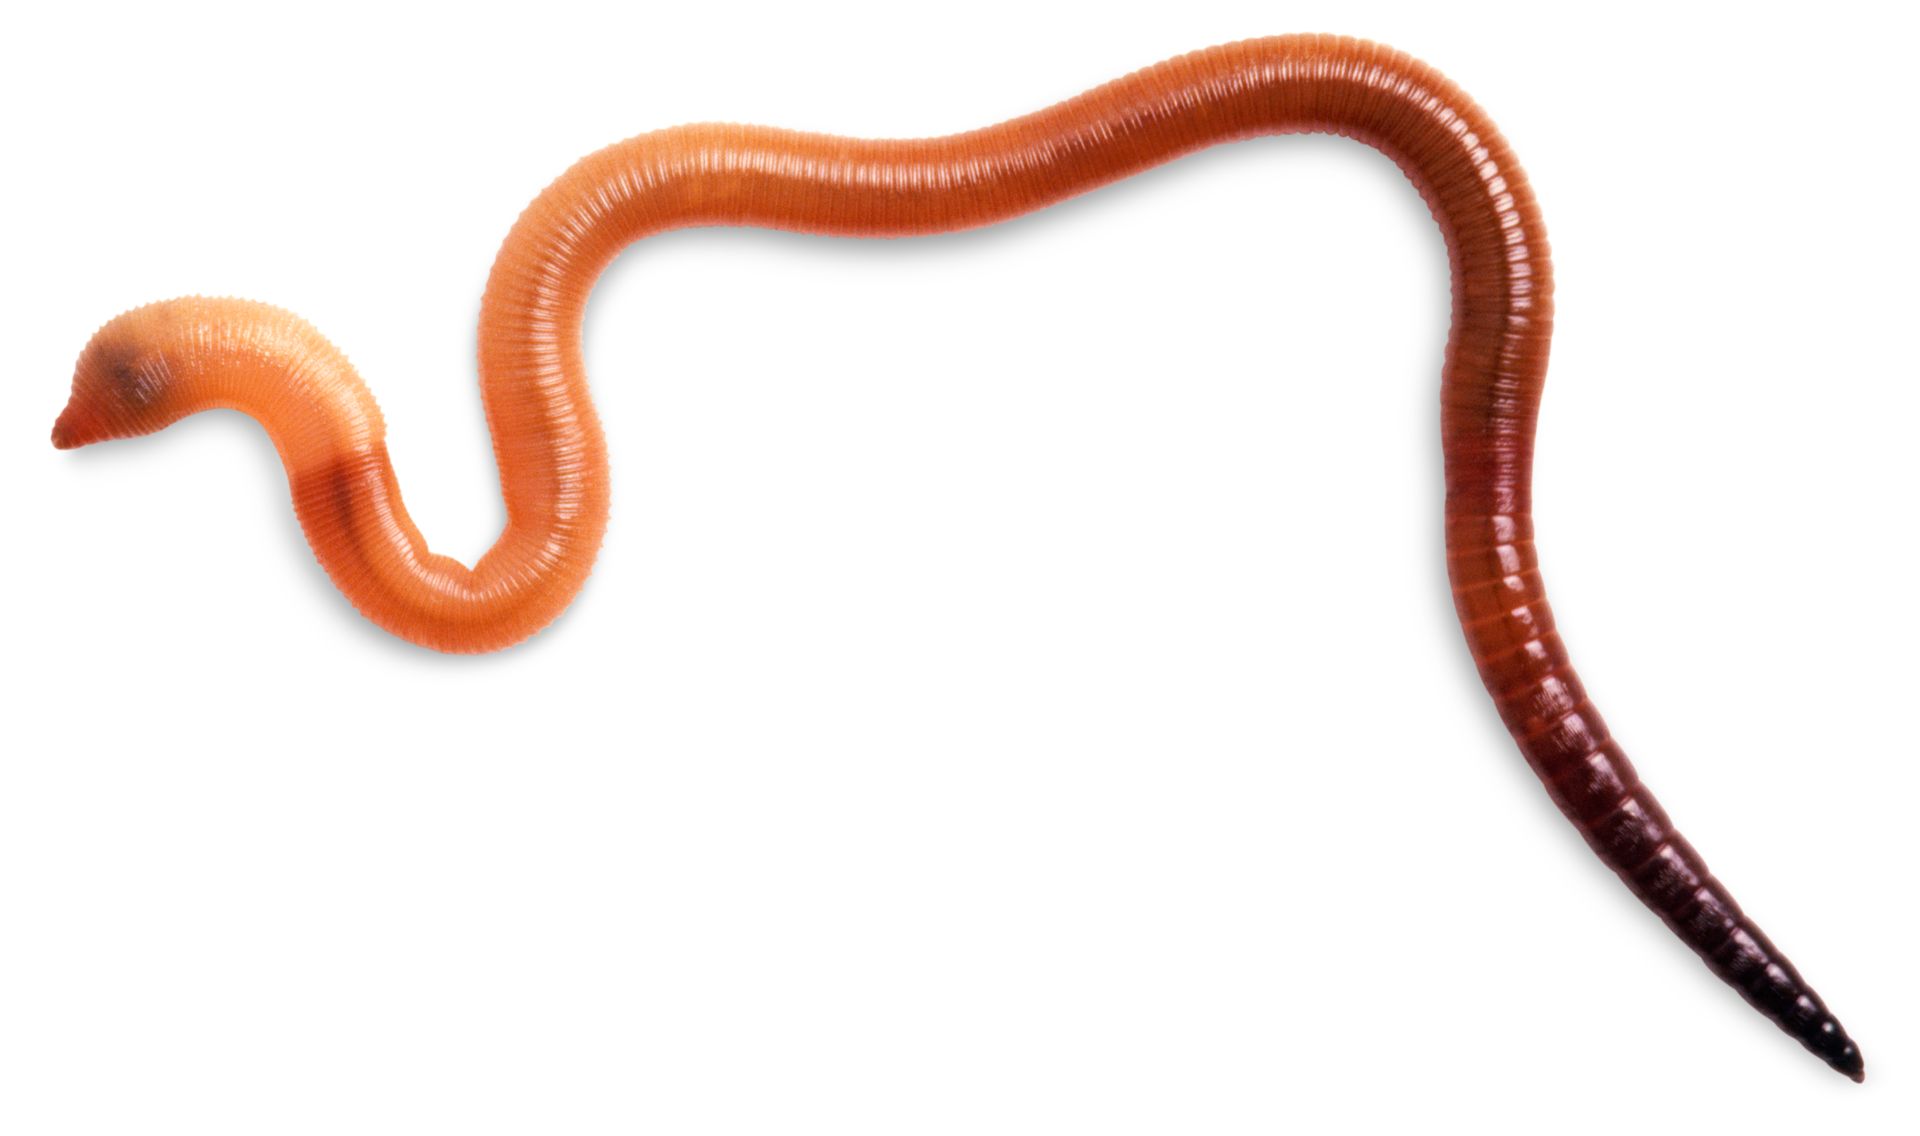 Earthworm Facts | Information About Worms | DK Find Out